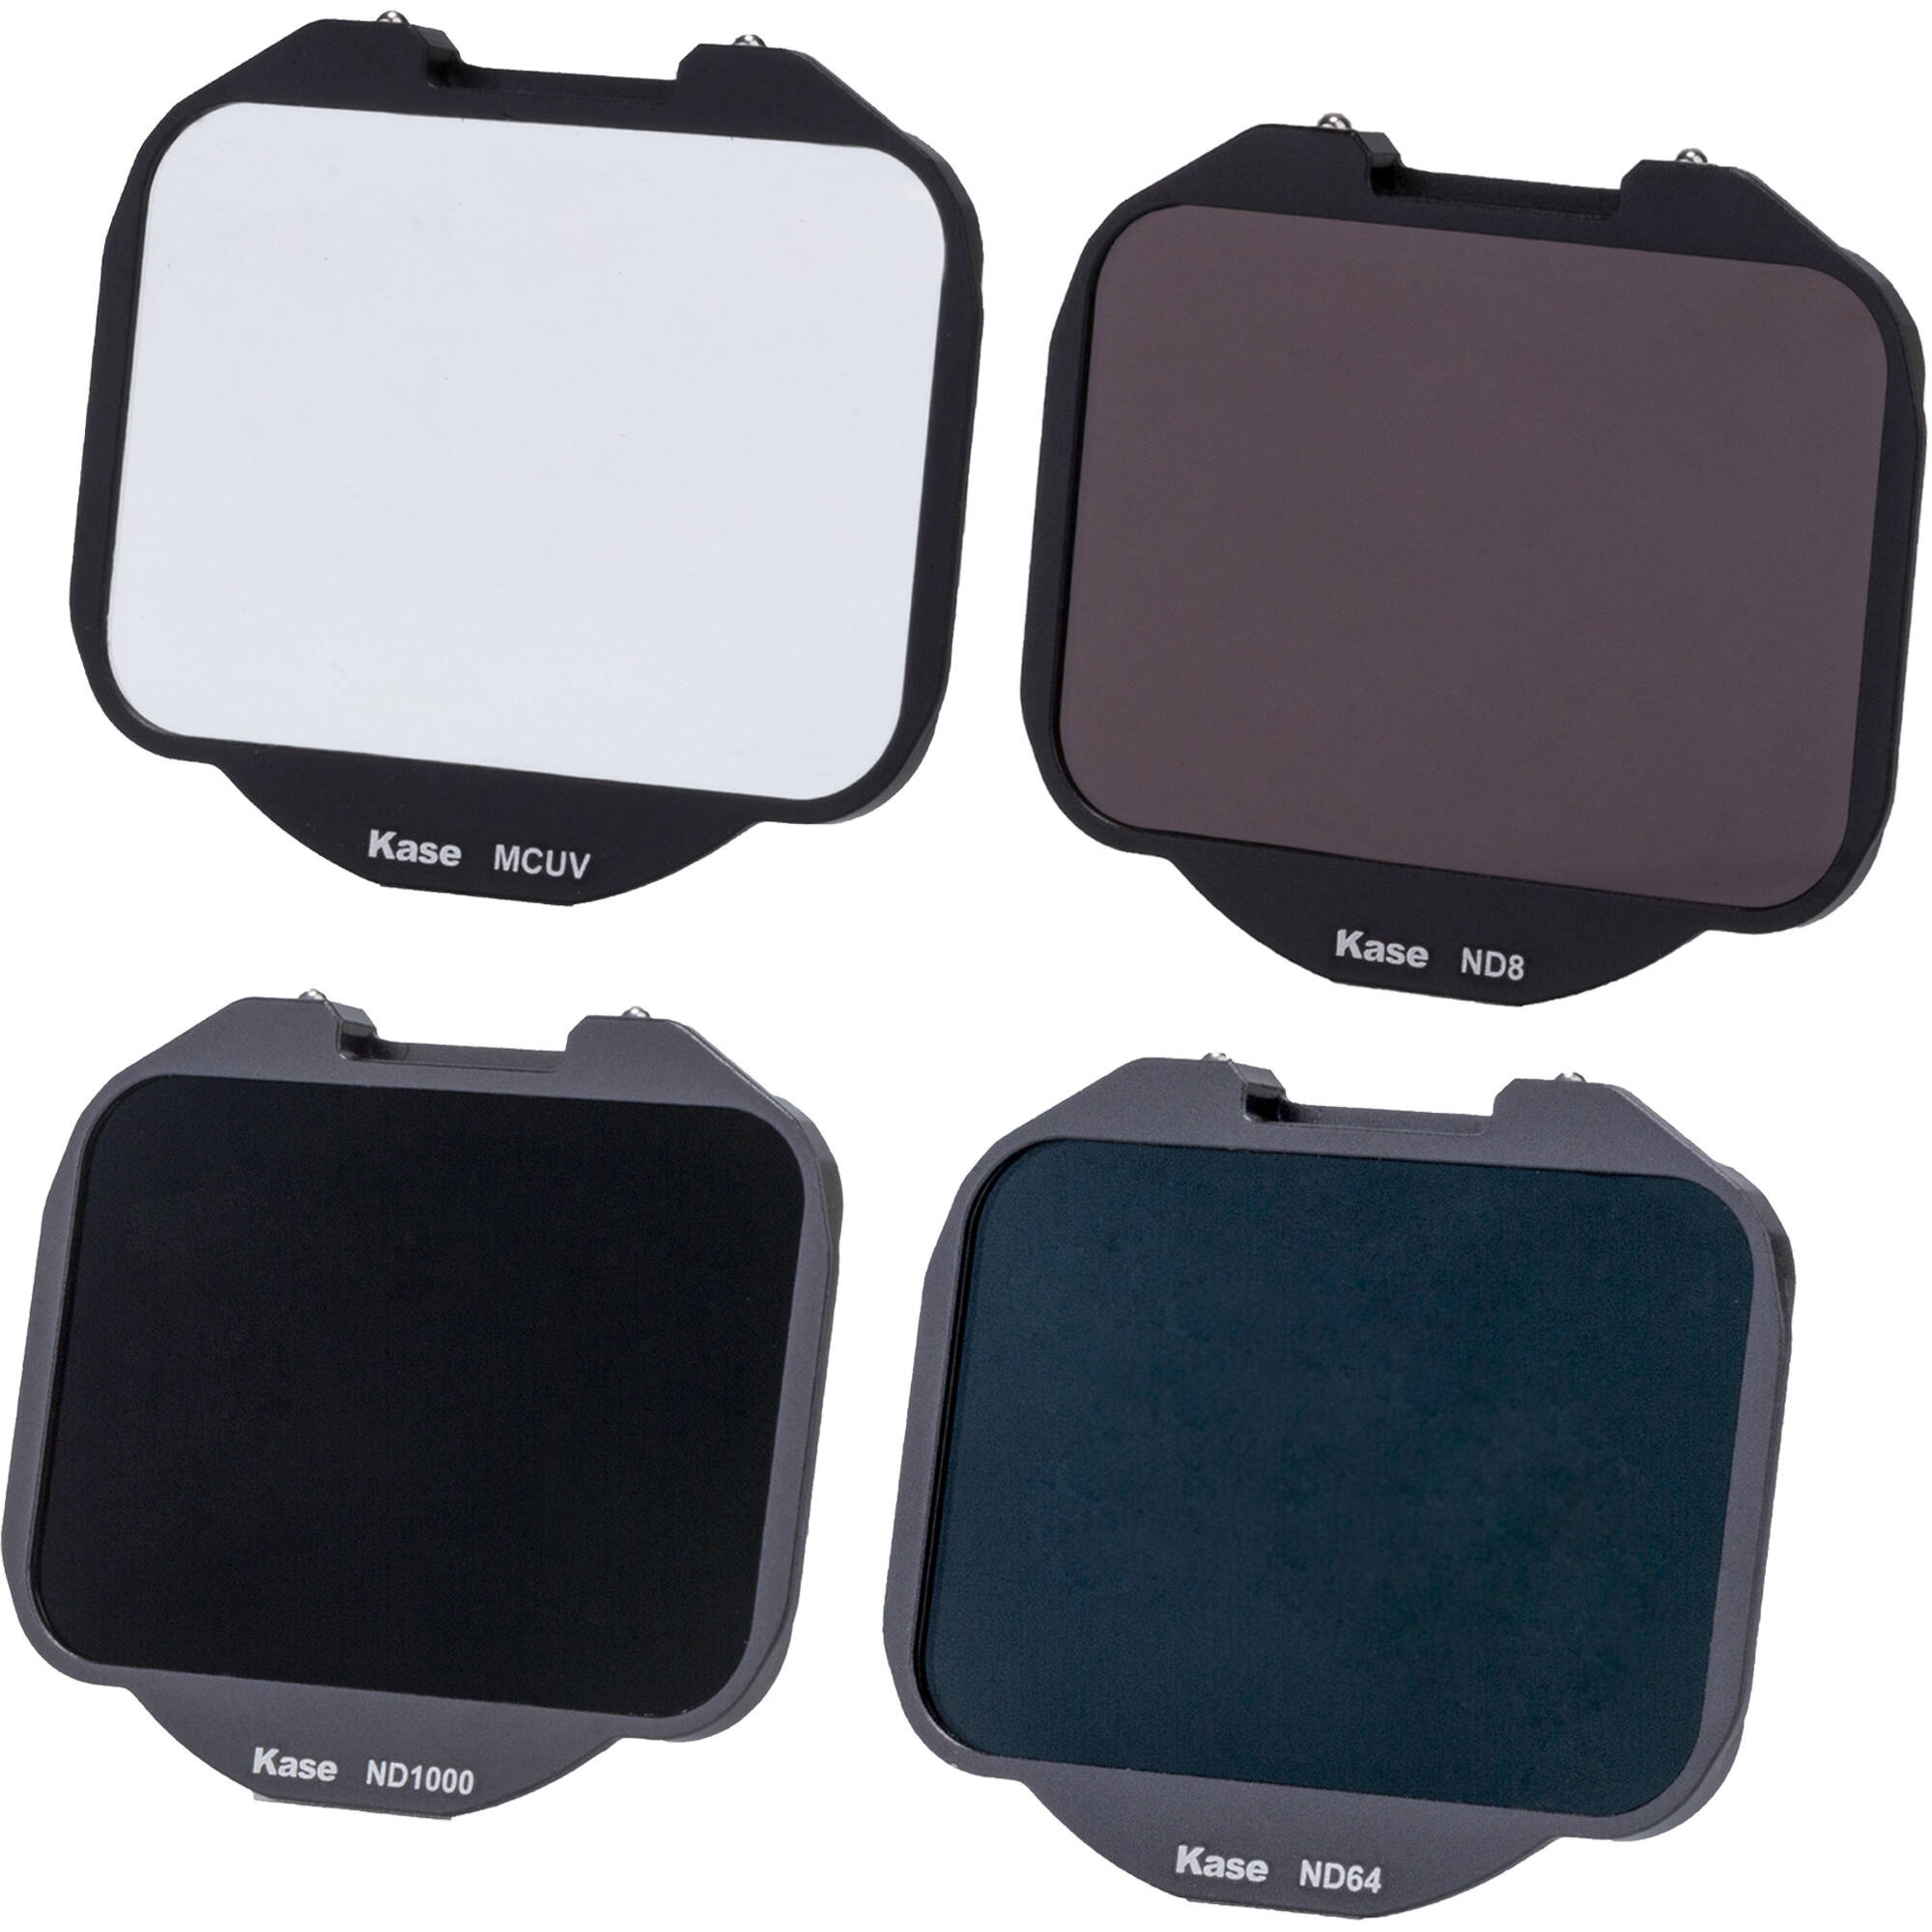 Kase 4-In-1 UV & ND Clip-In Filter Set for Sony Alpha Cameras (MCUV/ND8/ND64/ND1000)